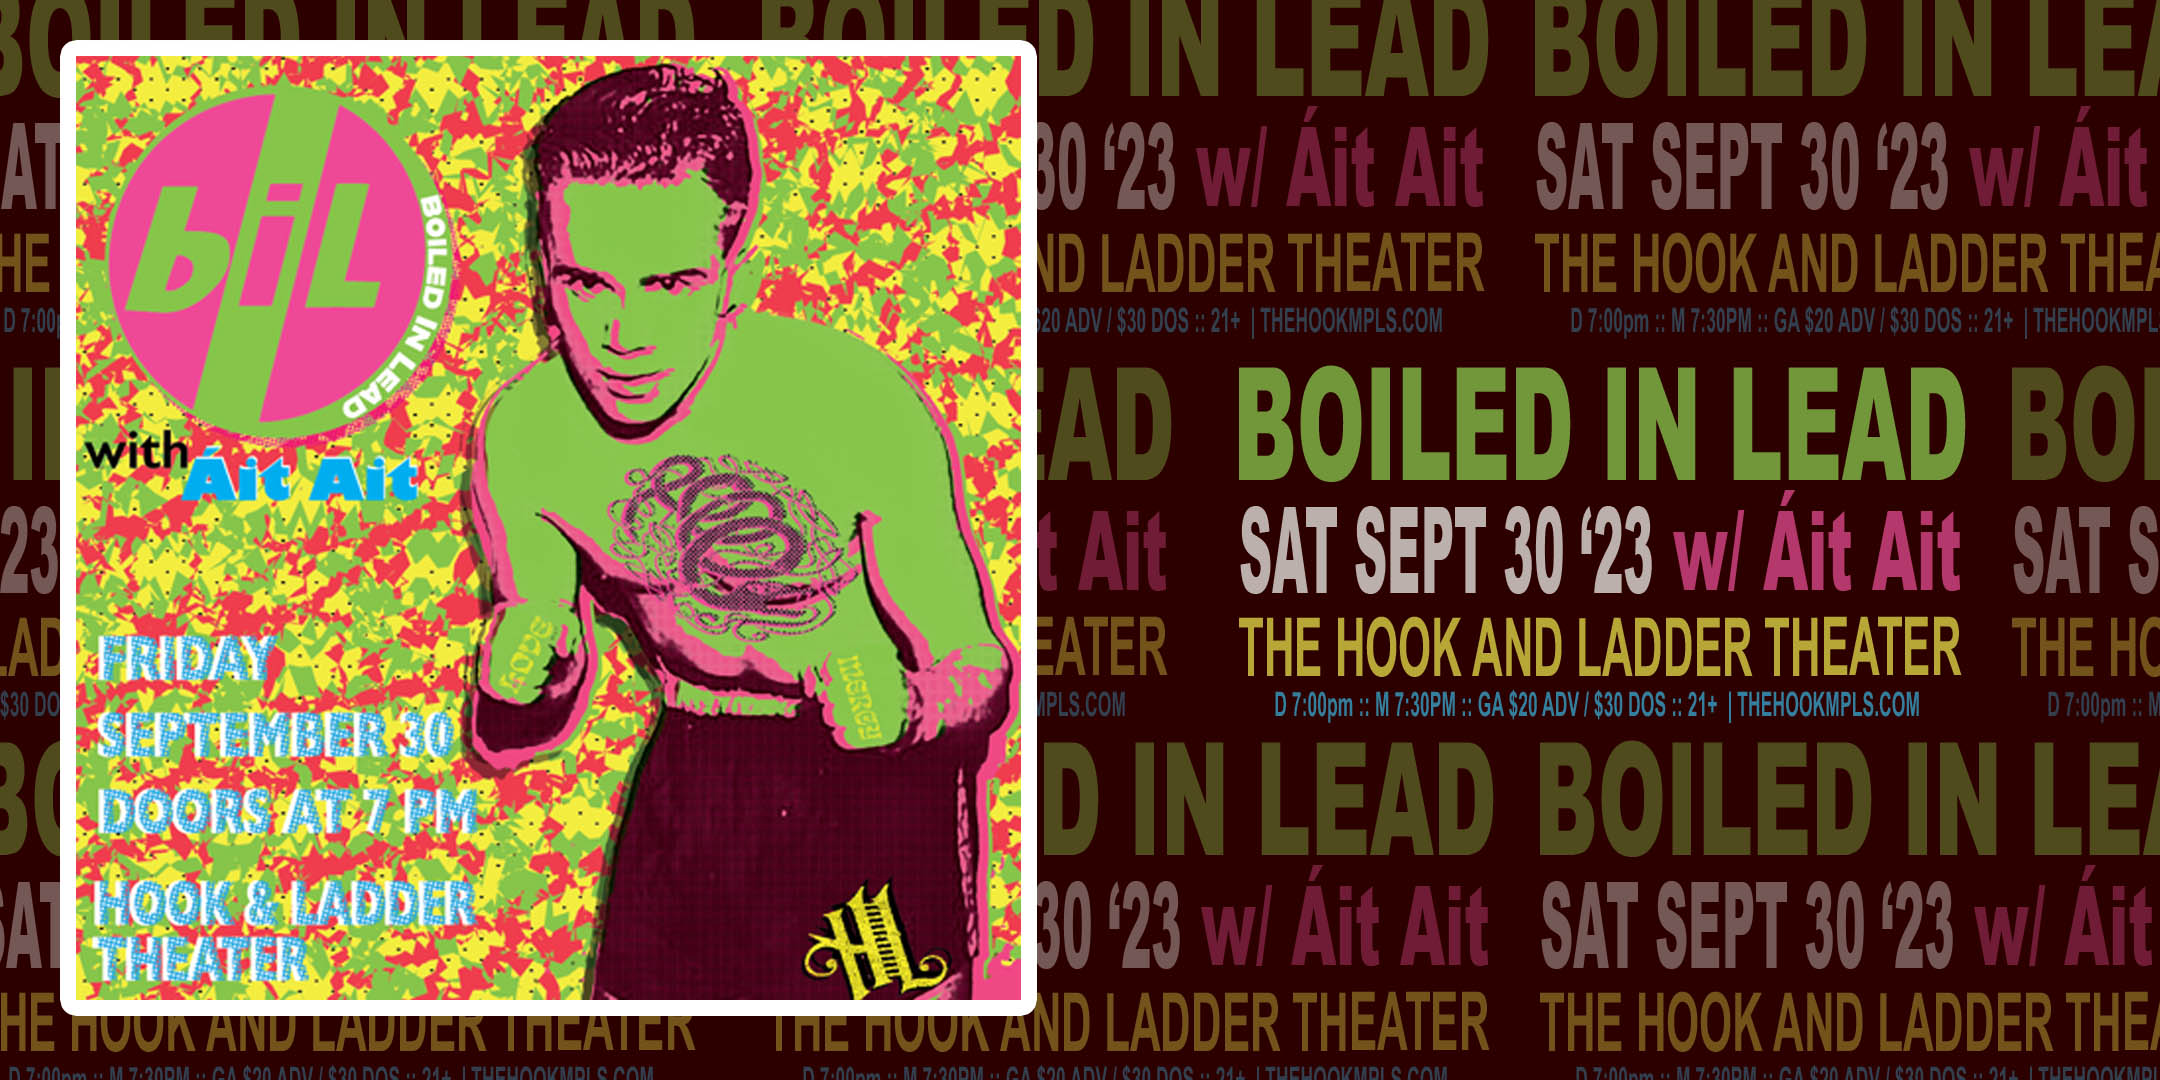 Boiled In Lead w/ special guests Áit Ait Saturday, September 30, 2023 The Hook and Ladder Theater Doors 7:00pm :: Music 7:30pm :: 21+ Reserved Seats (Limited): $35 General Admission*: $20 ADV / $30 DOS * Does not include fees NO REFUNDS